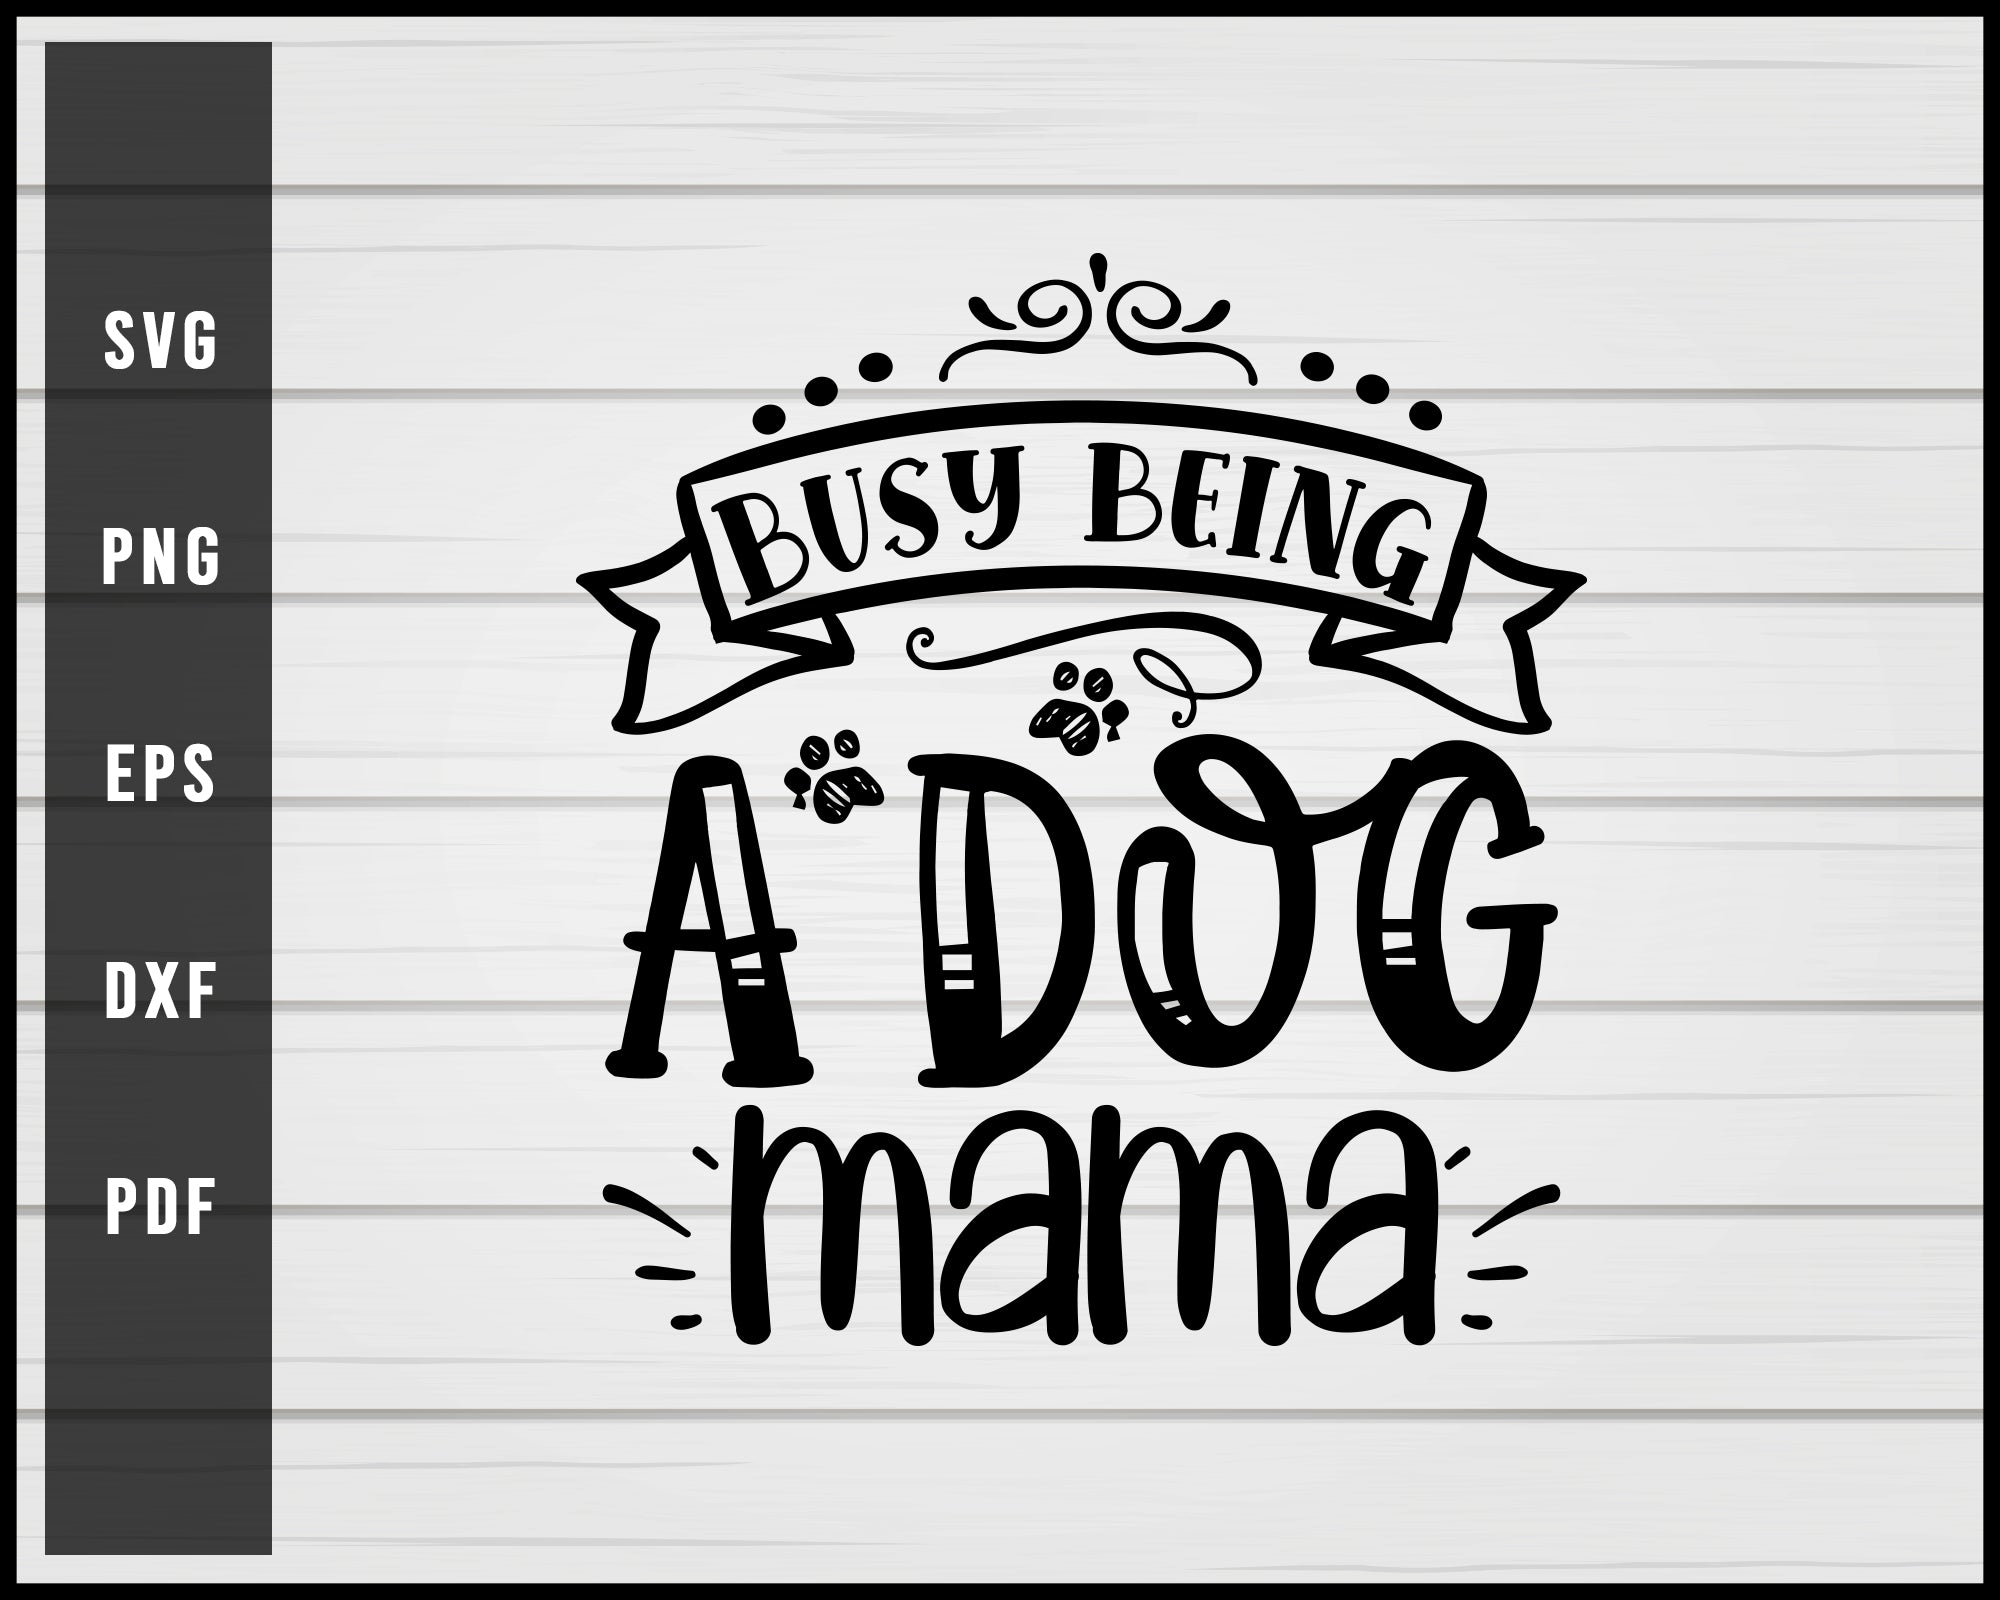 Busy being a dog mama svg png eps Silhouette Designs For Cricut And Printable Files